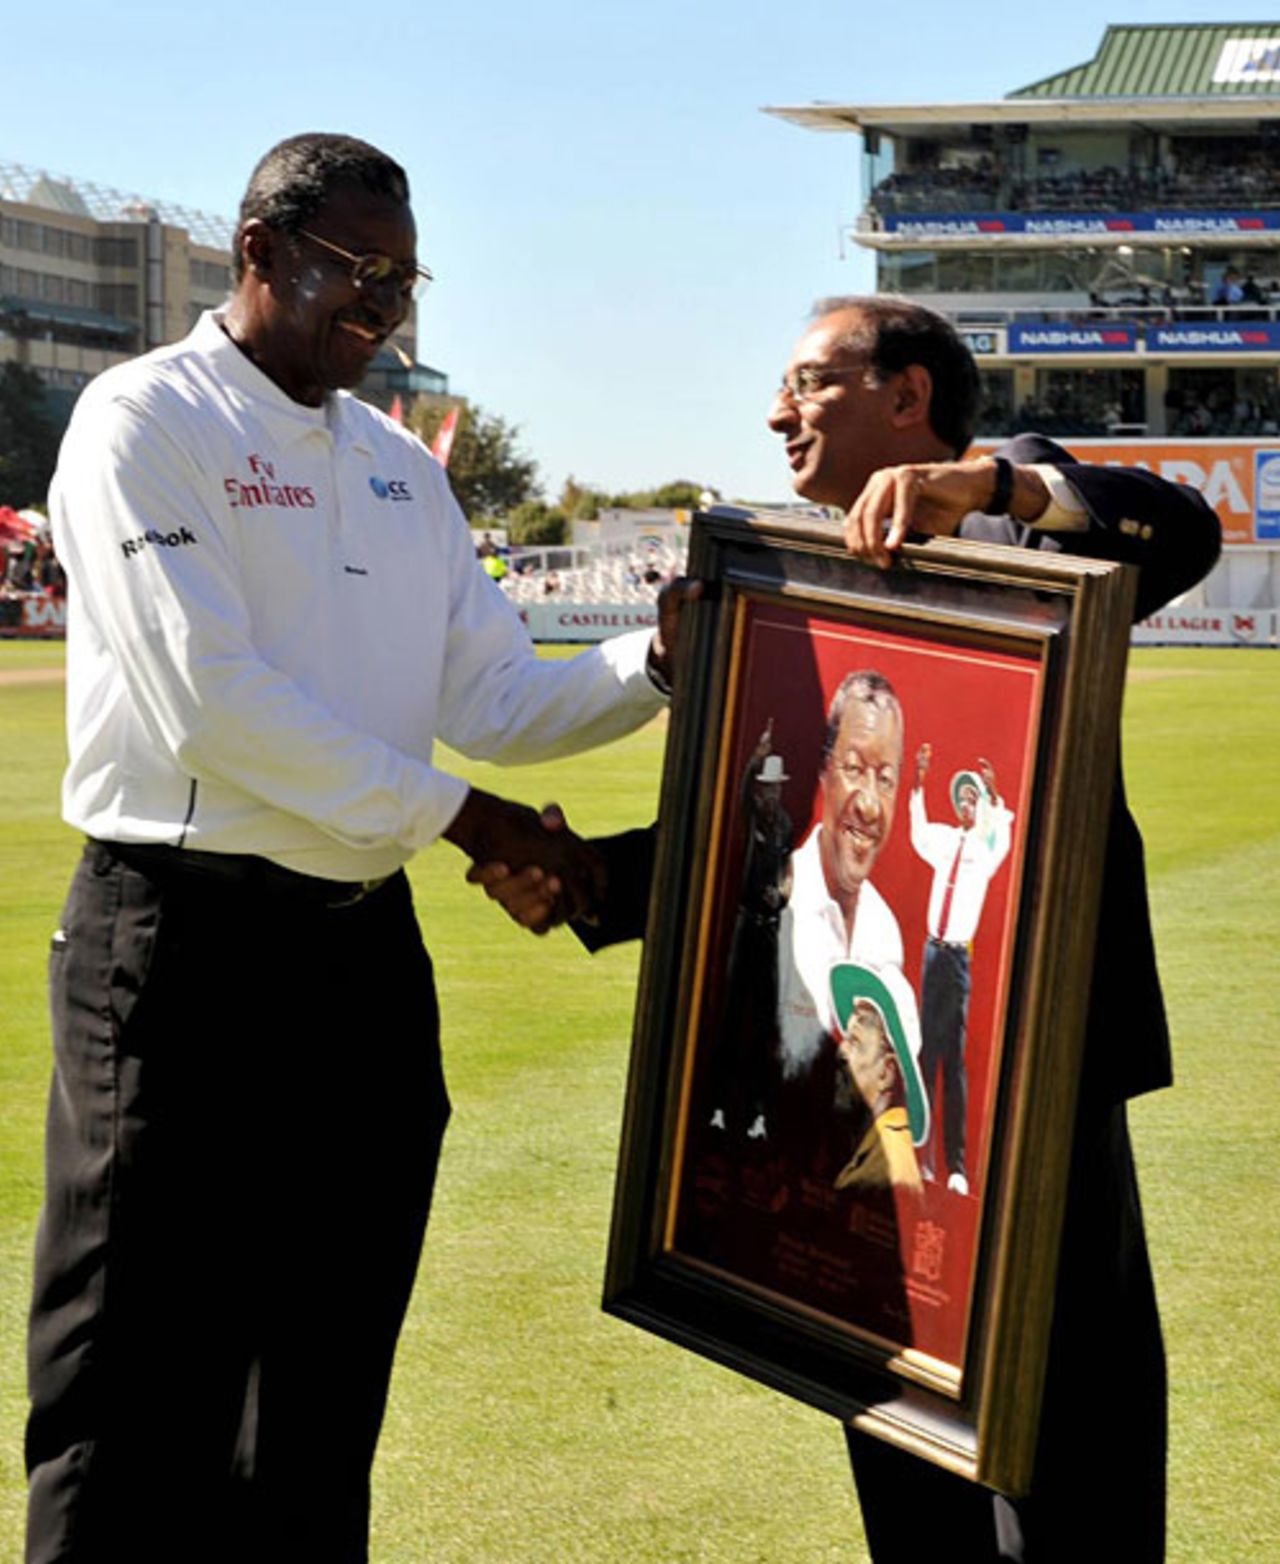 Steve Bucknor, standing in his final Test, is awarded a memento by ICC CEO Haroon Lorgat, South Africa v Australia, 3rd Test, 2nd day, Cape Town, March 20, 2009